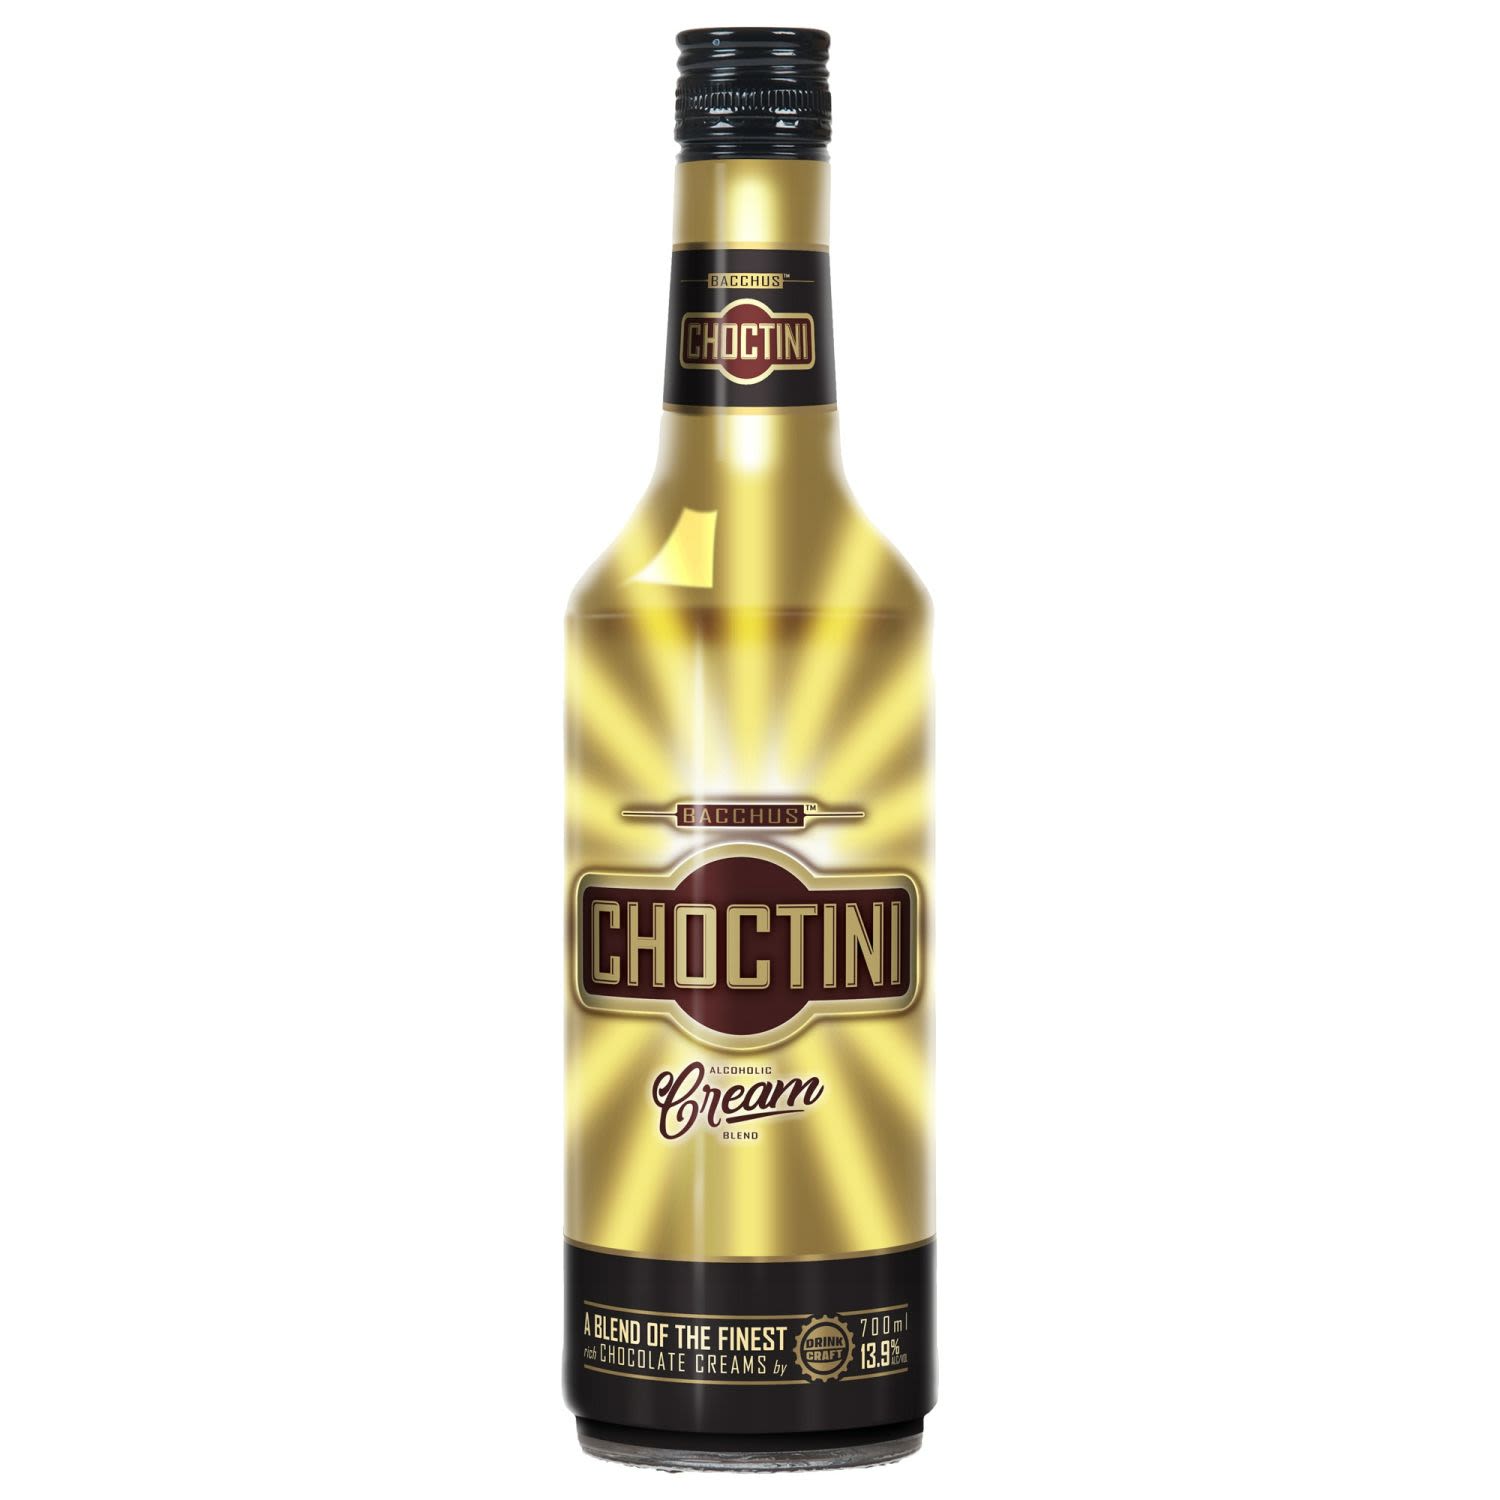 Premium cream liqueur infused with velvet chocolate flavoured liqueur. The taste is reminiscent of melting dark chocolate with a smooth cream finish.<br /> <br />Alcohol Volume: 13.90%<br /><br />Pack Format: Bottle<br /><br />Standard Drinks: 7.7</br /><br />Pack Type: Bottle<br /><br />Country of Origin: Australia<br />